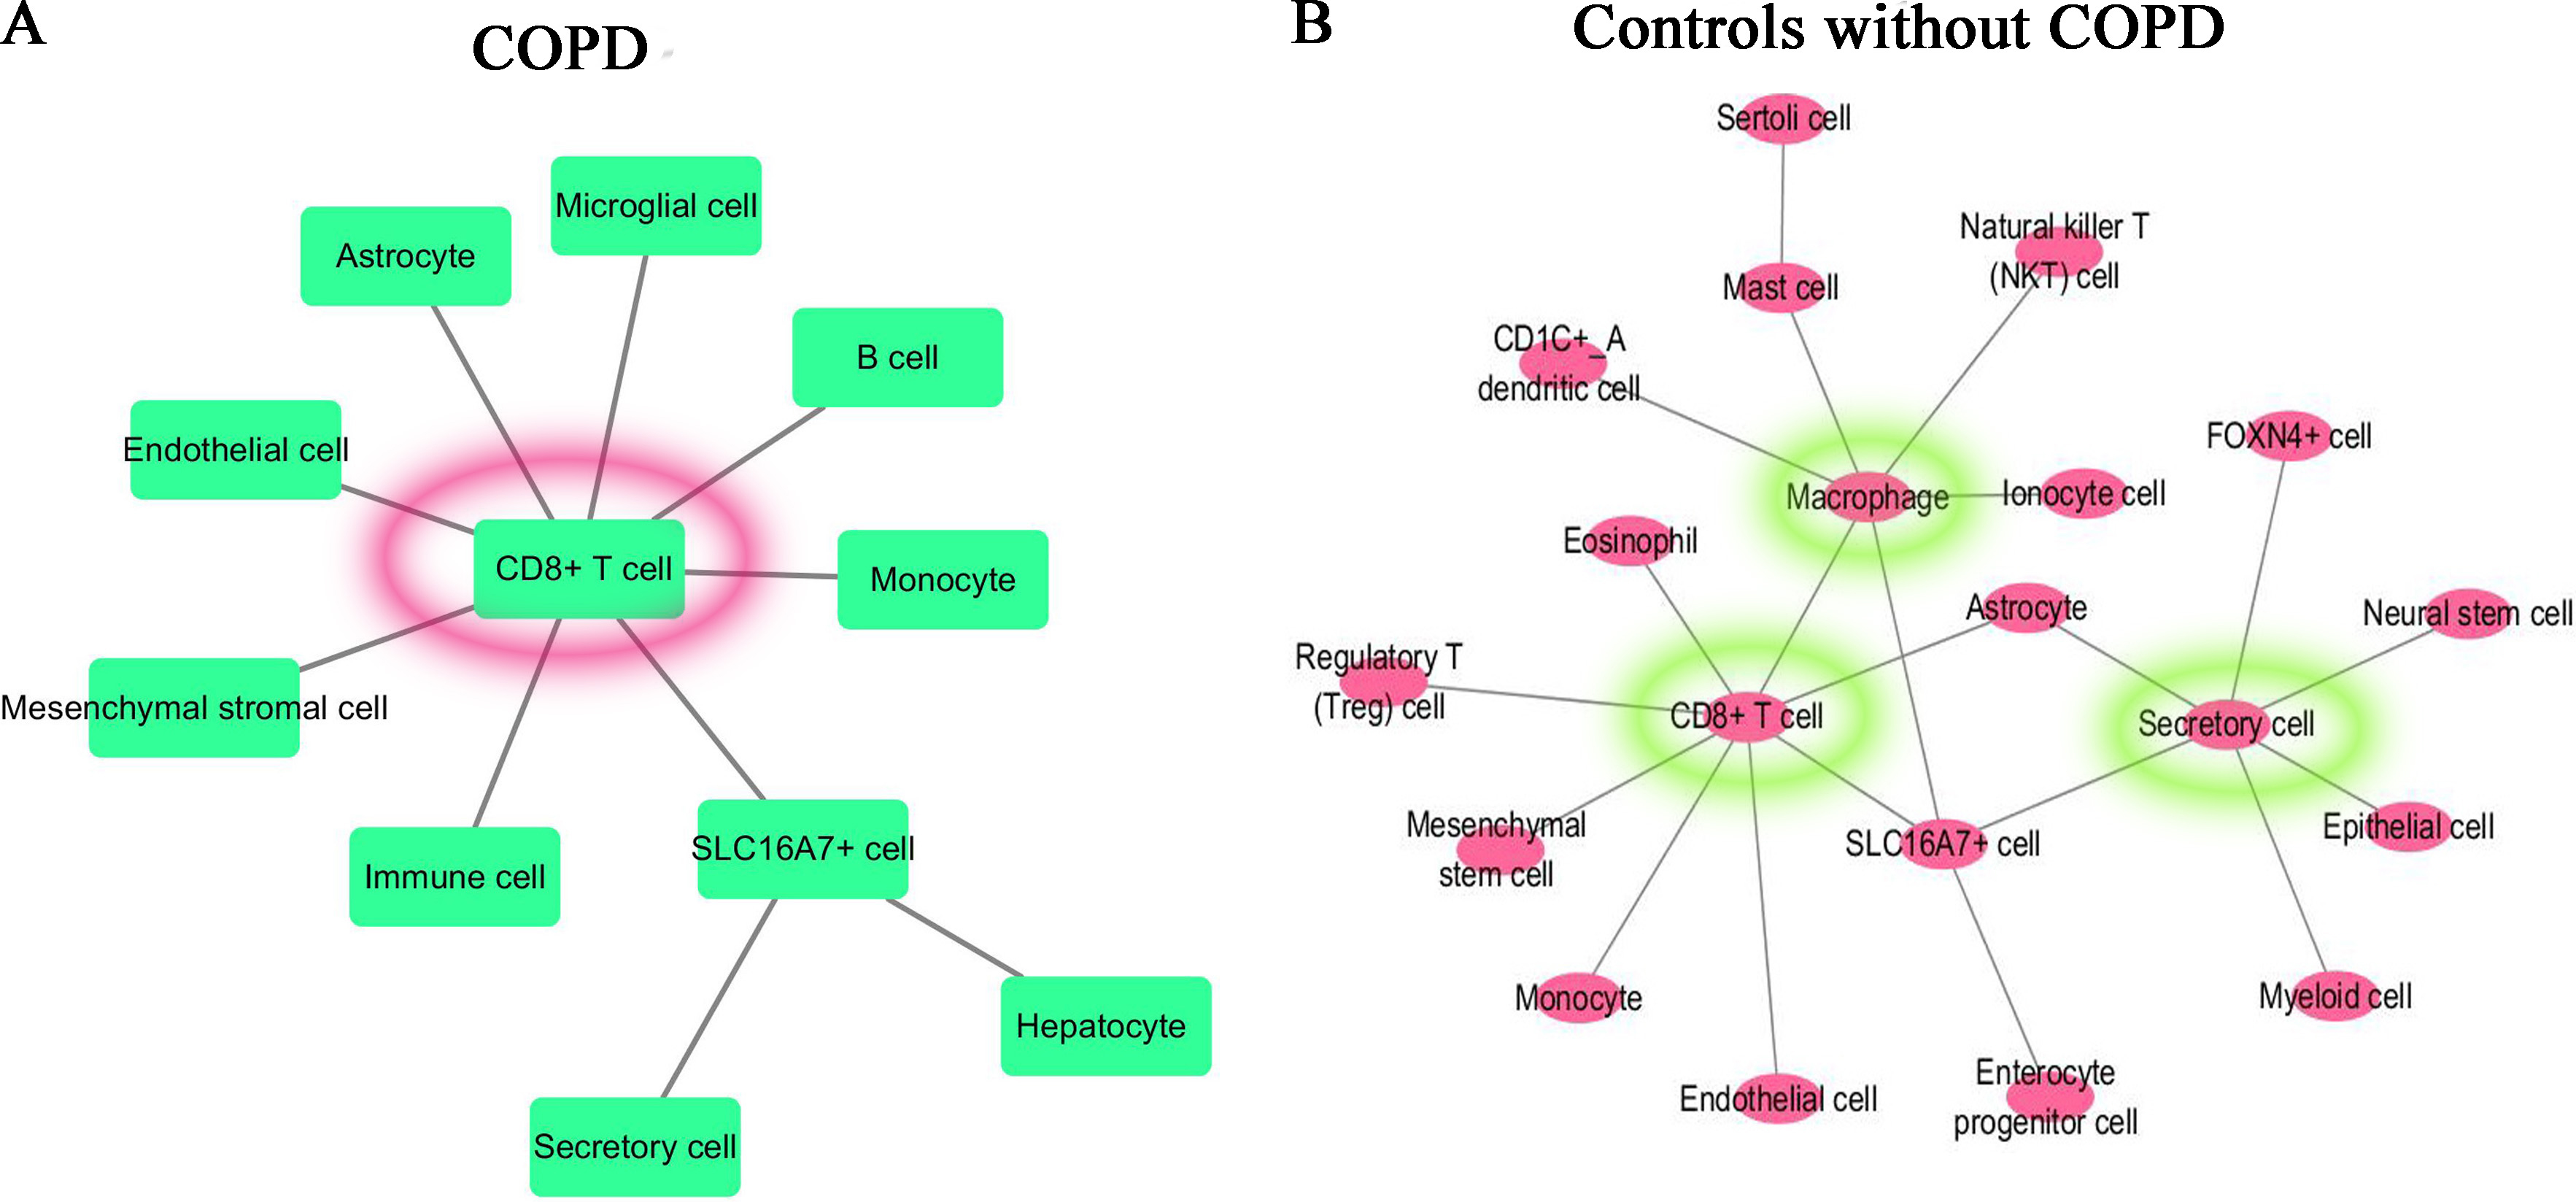 Cell-cell interaction networks. (A) For COPD patient, the cell–cell interaction network was dominated by CD8+ T cell. (B) For controls, the cell-cell interaction network was dominated by CD8+ T cell, Macrophage cell and Secretory cell. 